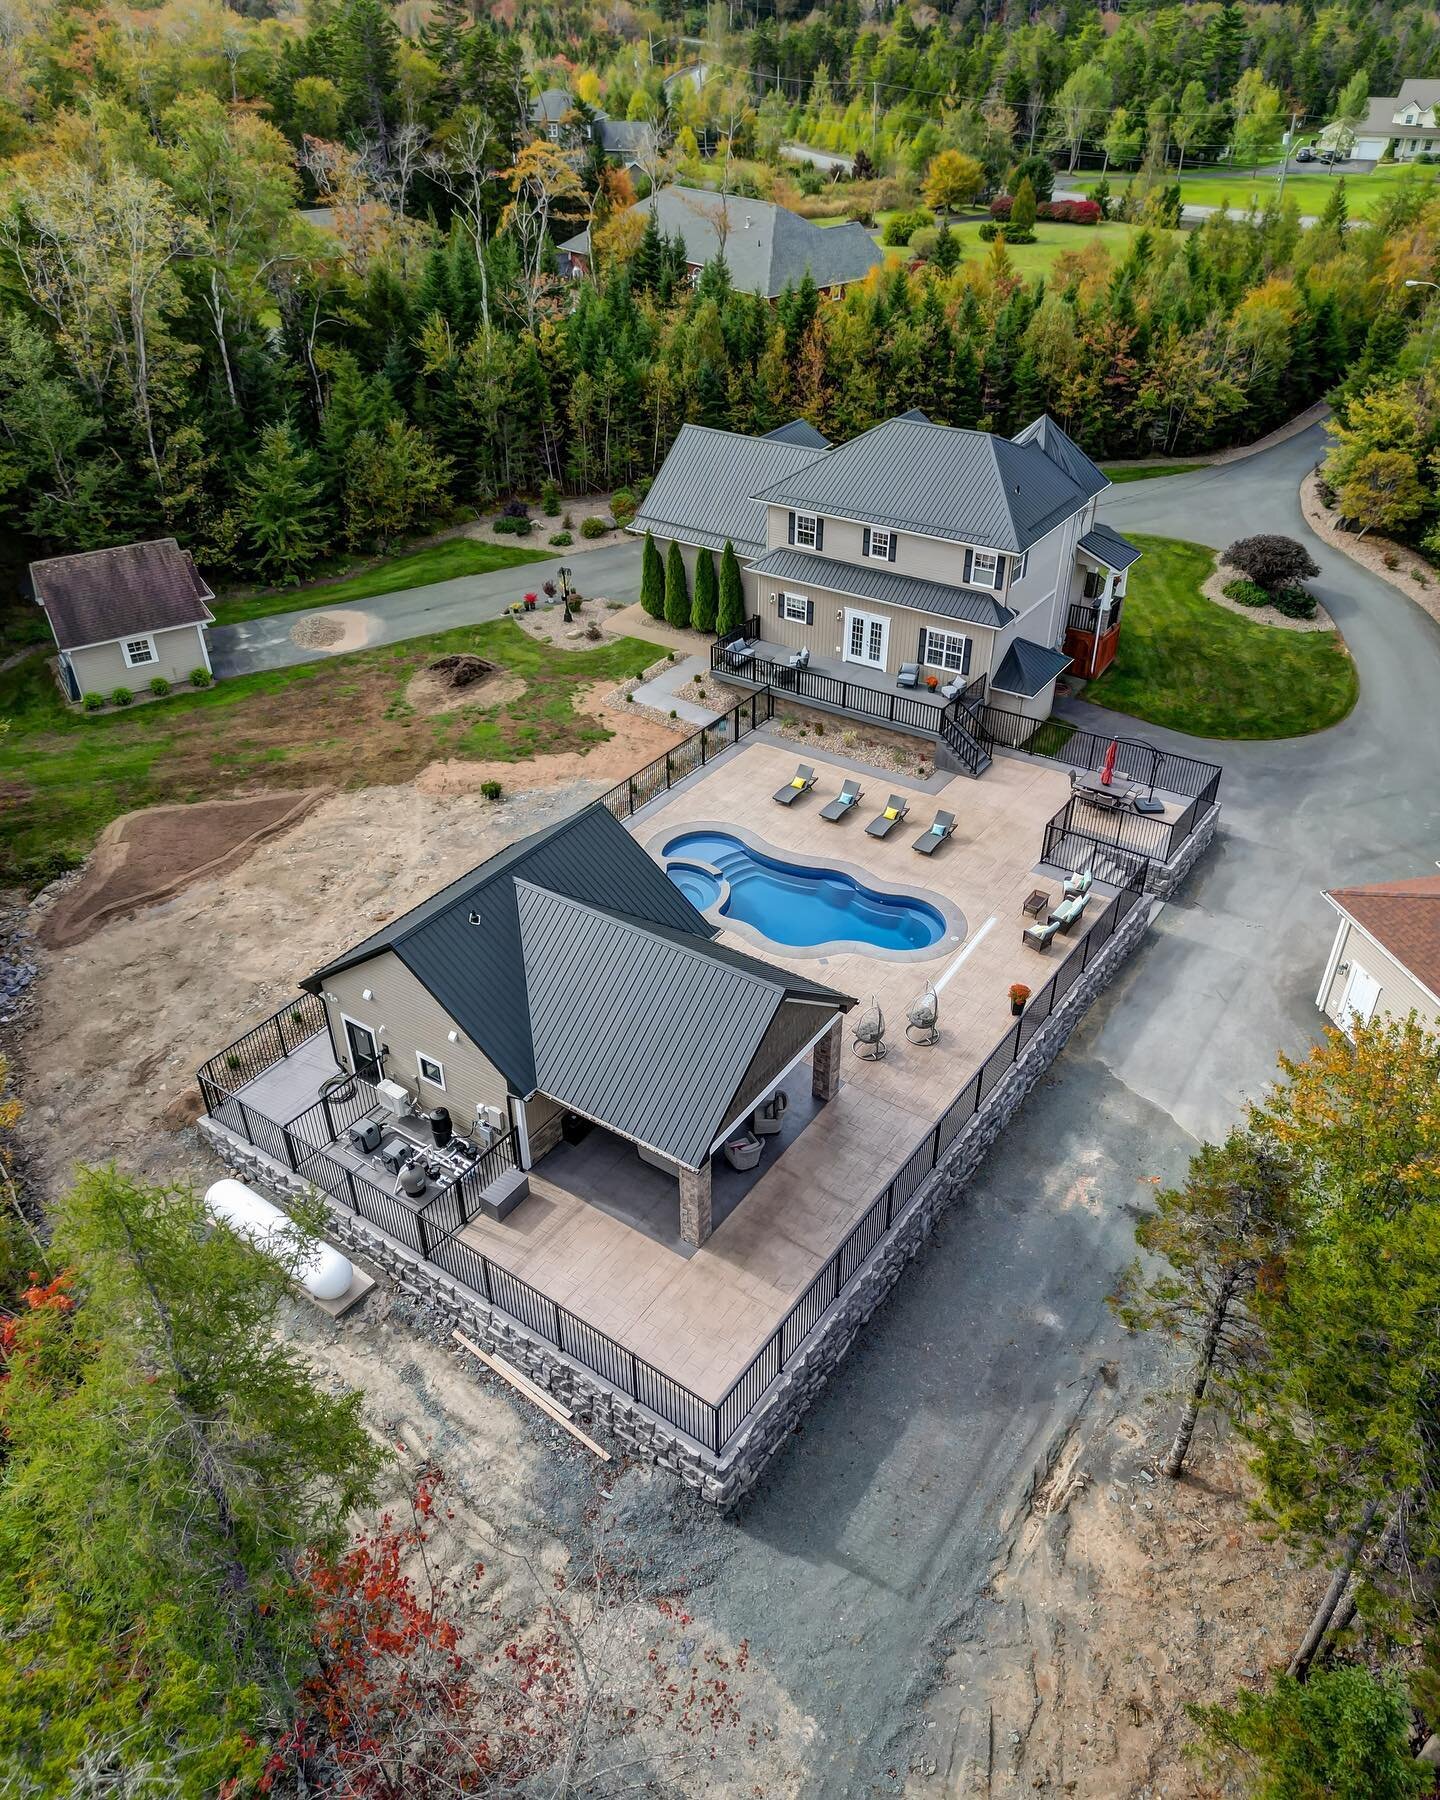 Beautiful photos of a project we had the pleasure of working on for our friends at @highmarkcustomhomes  We installed the stone retaining wall and the @regalideas 5&rsquo; pool fence. 
What a stunning outdoor living space! 
#retainingwall #dreambacky